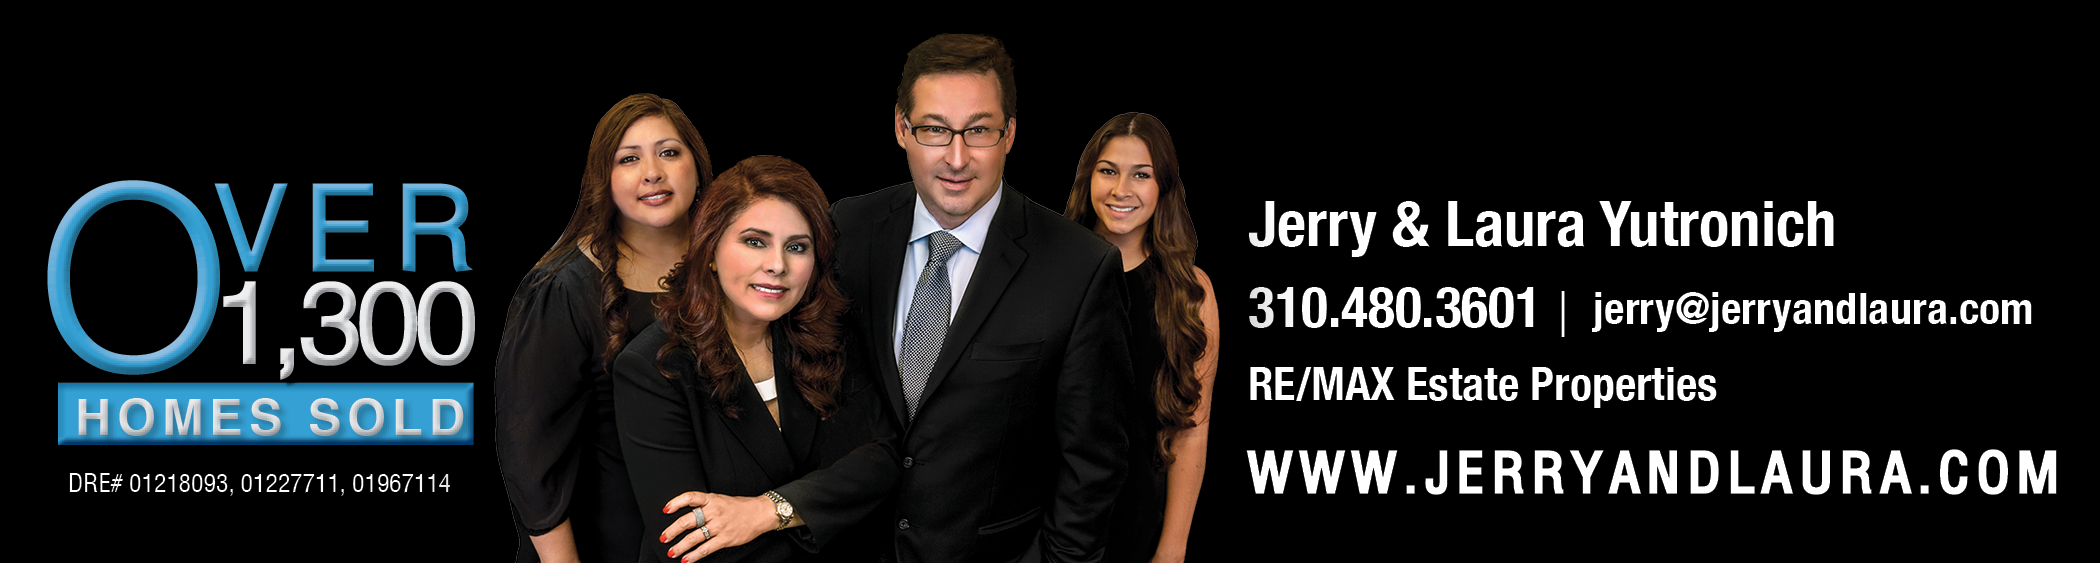 Jerry and Laura Yutronich REMAX logo